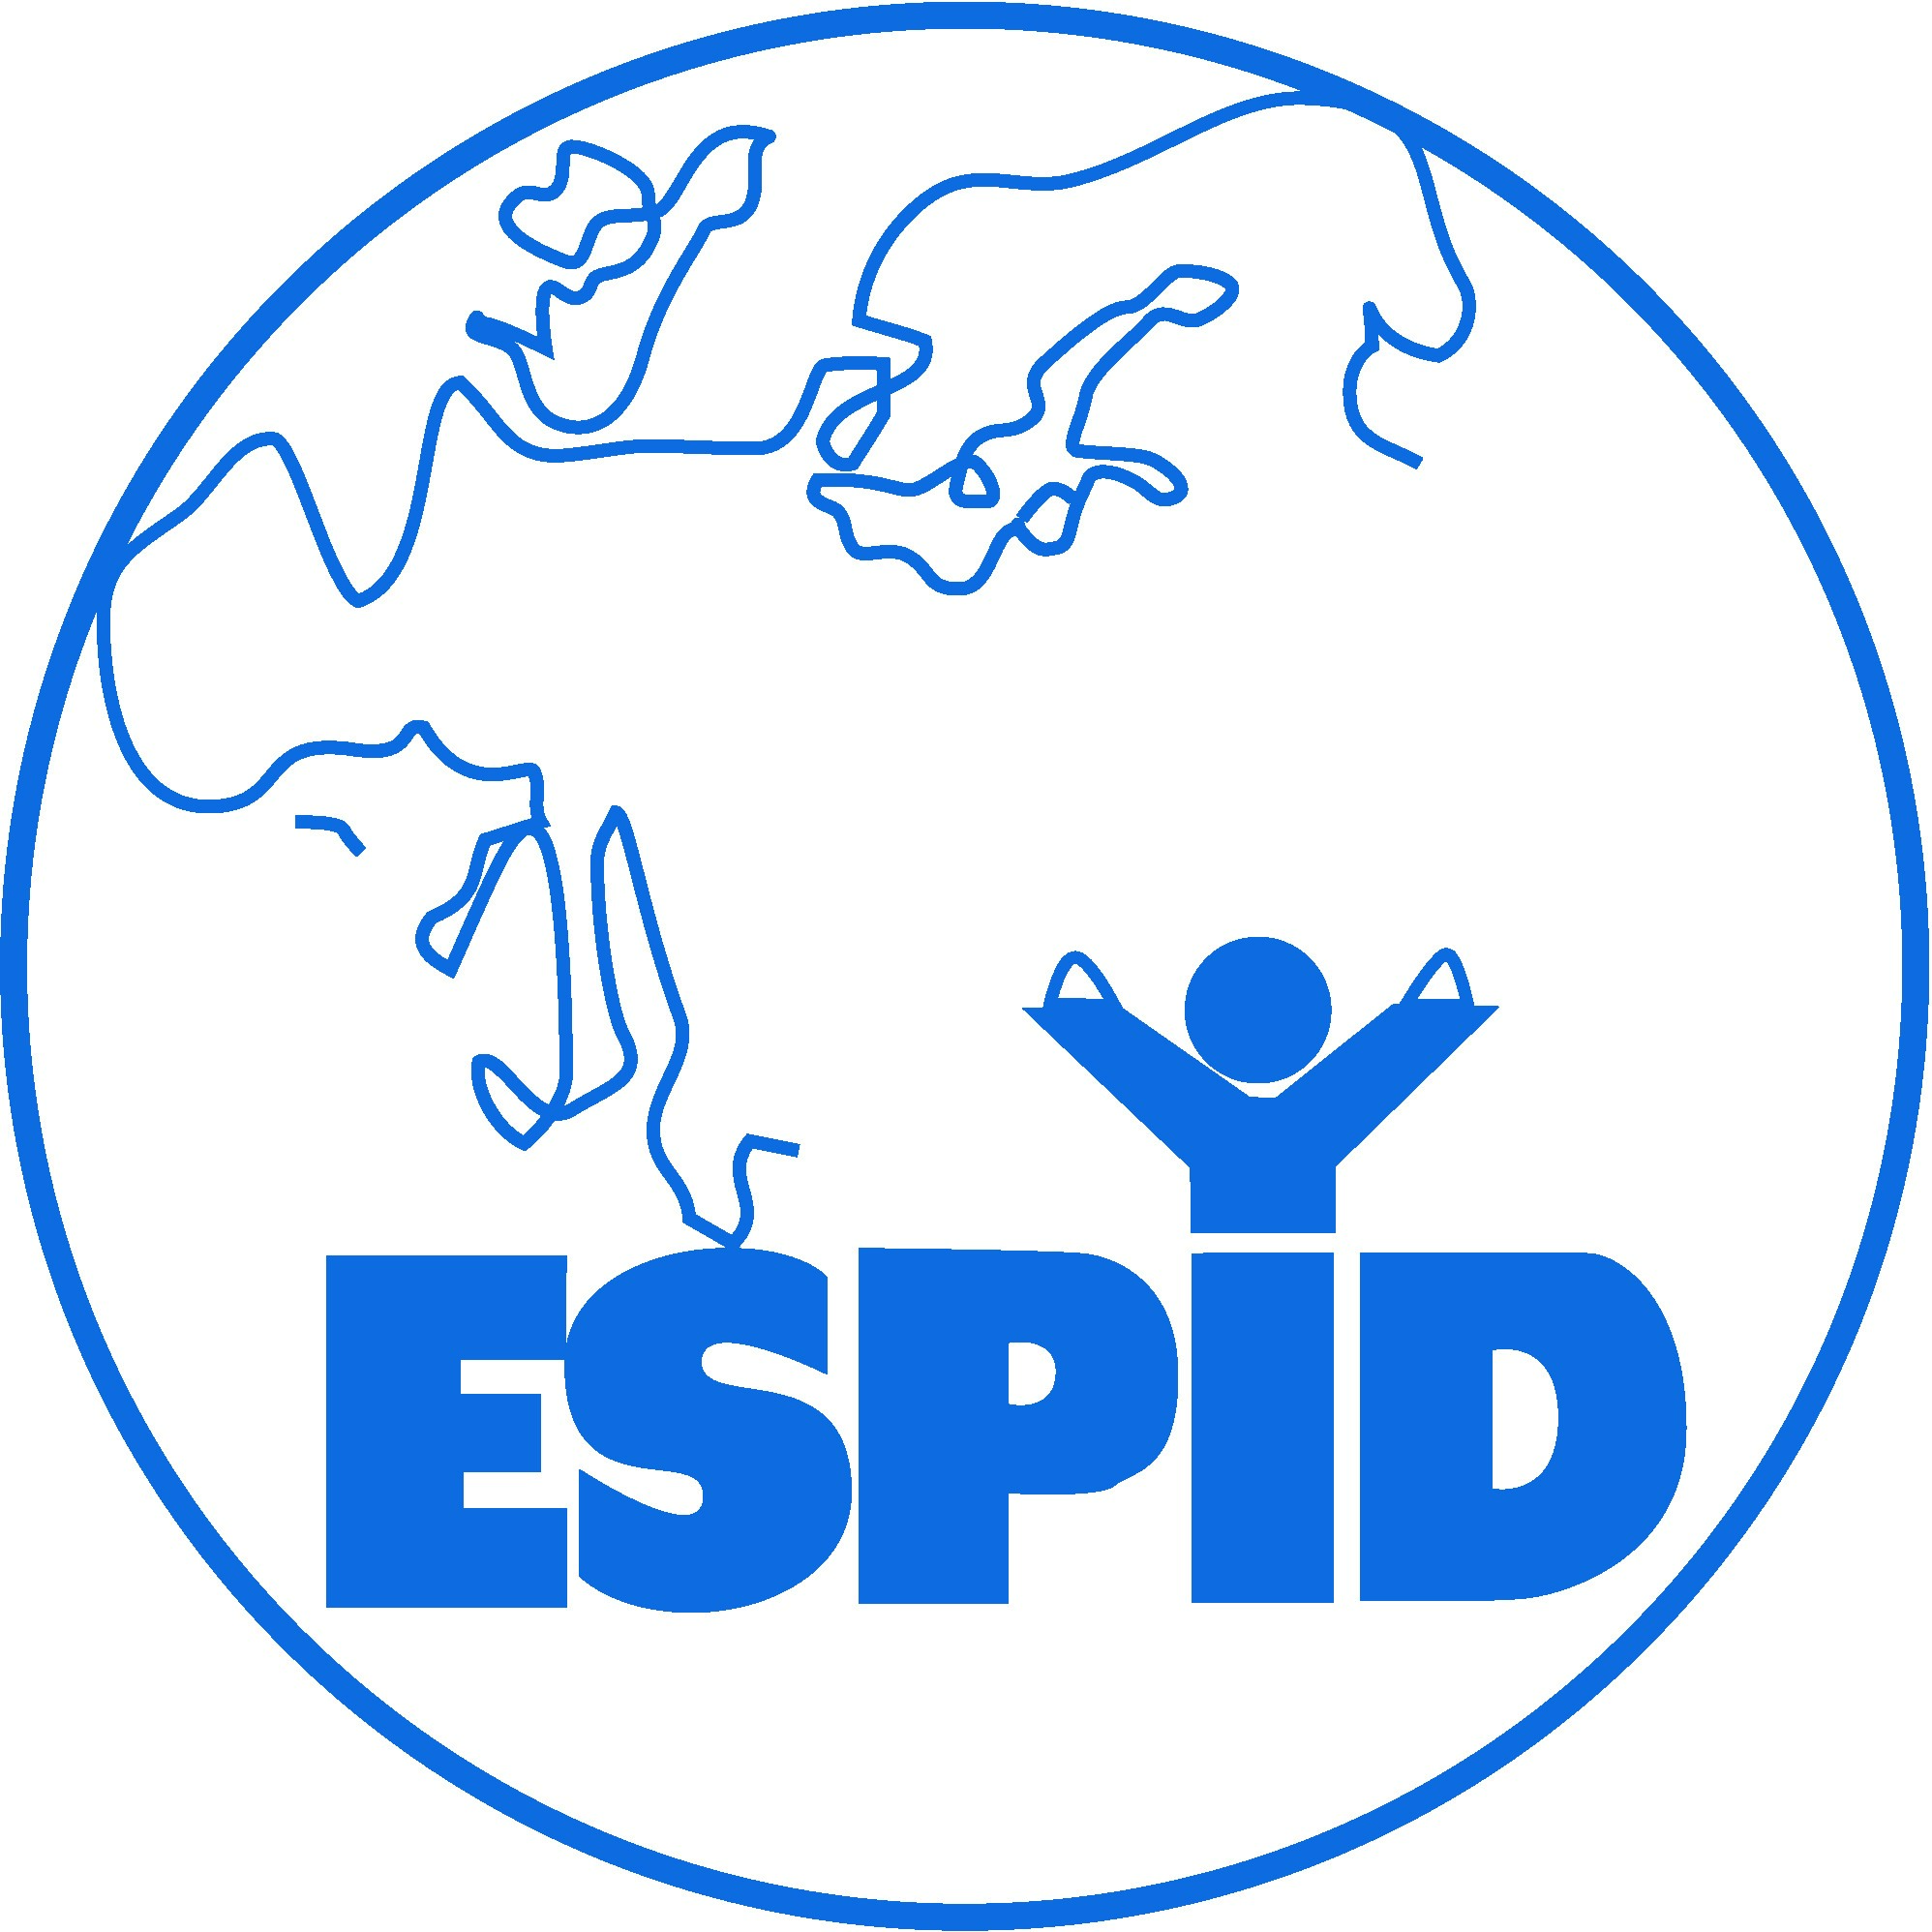 ESPID 2023 VIRTUAL - The 41st Meeting of The European Society for Paediatric Infectious Diseases / Virtual